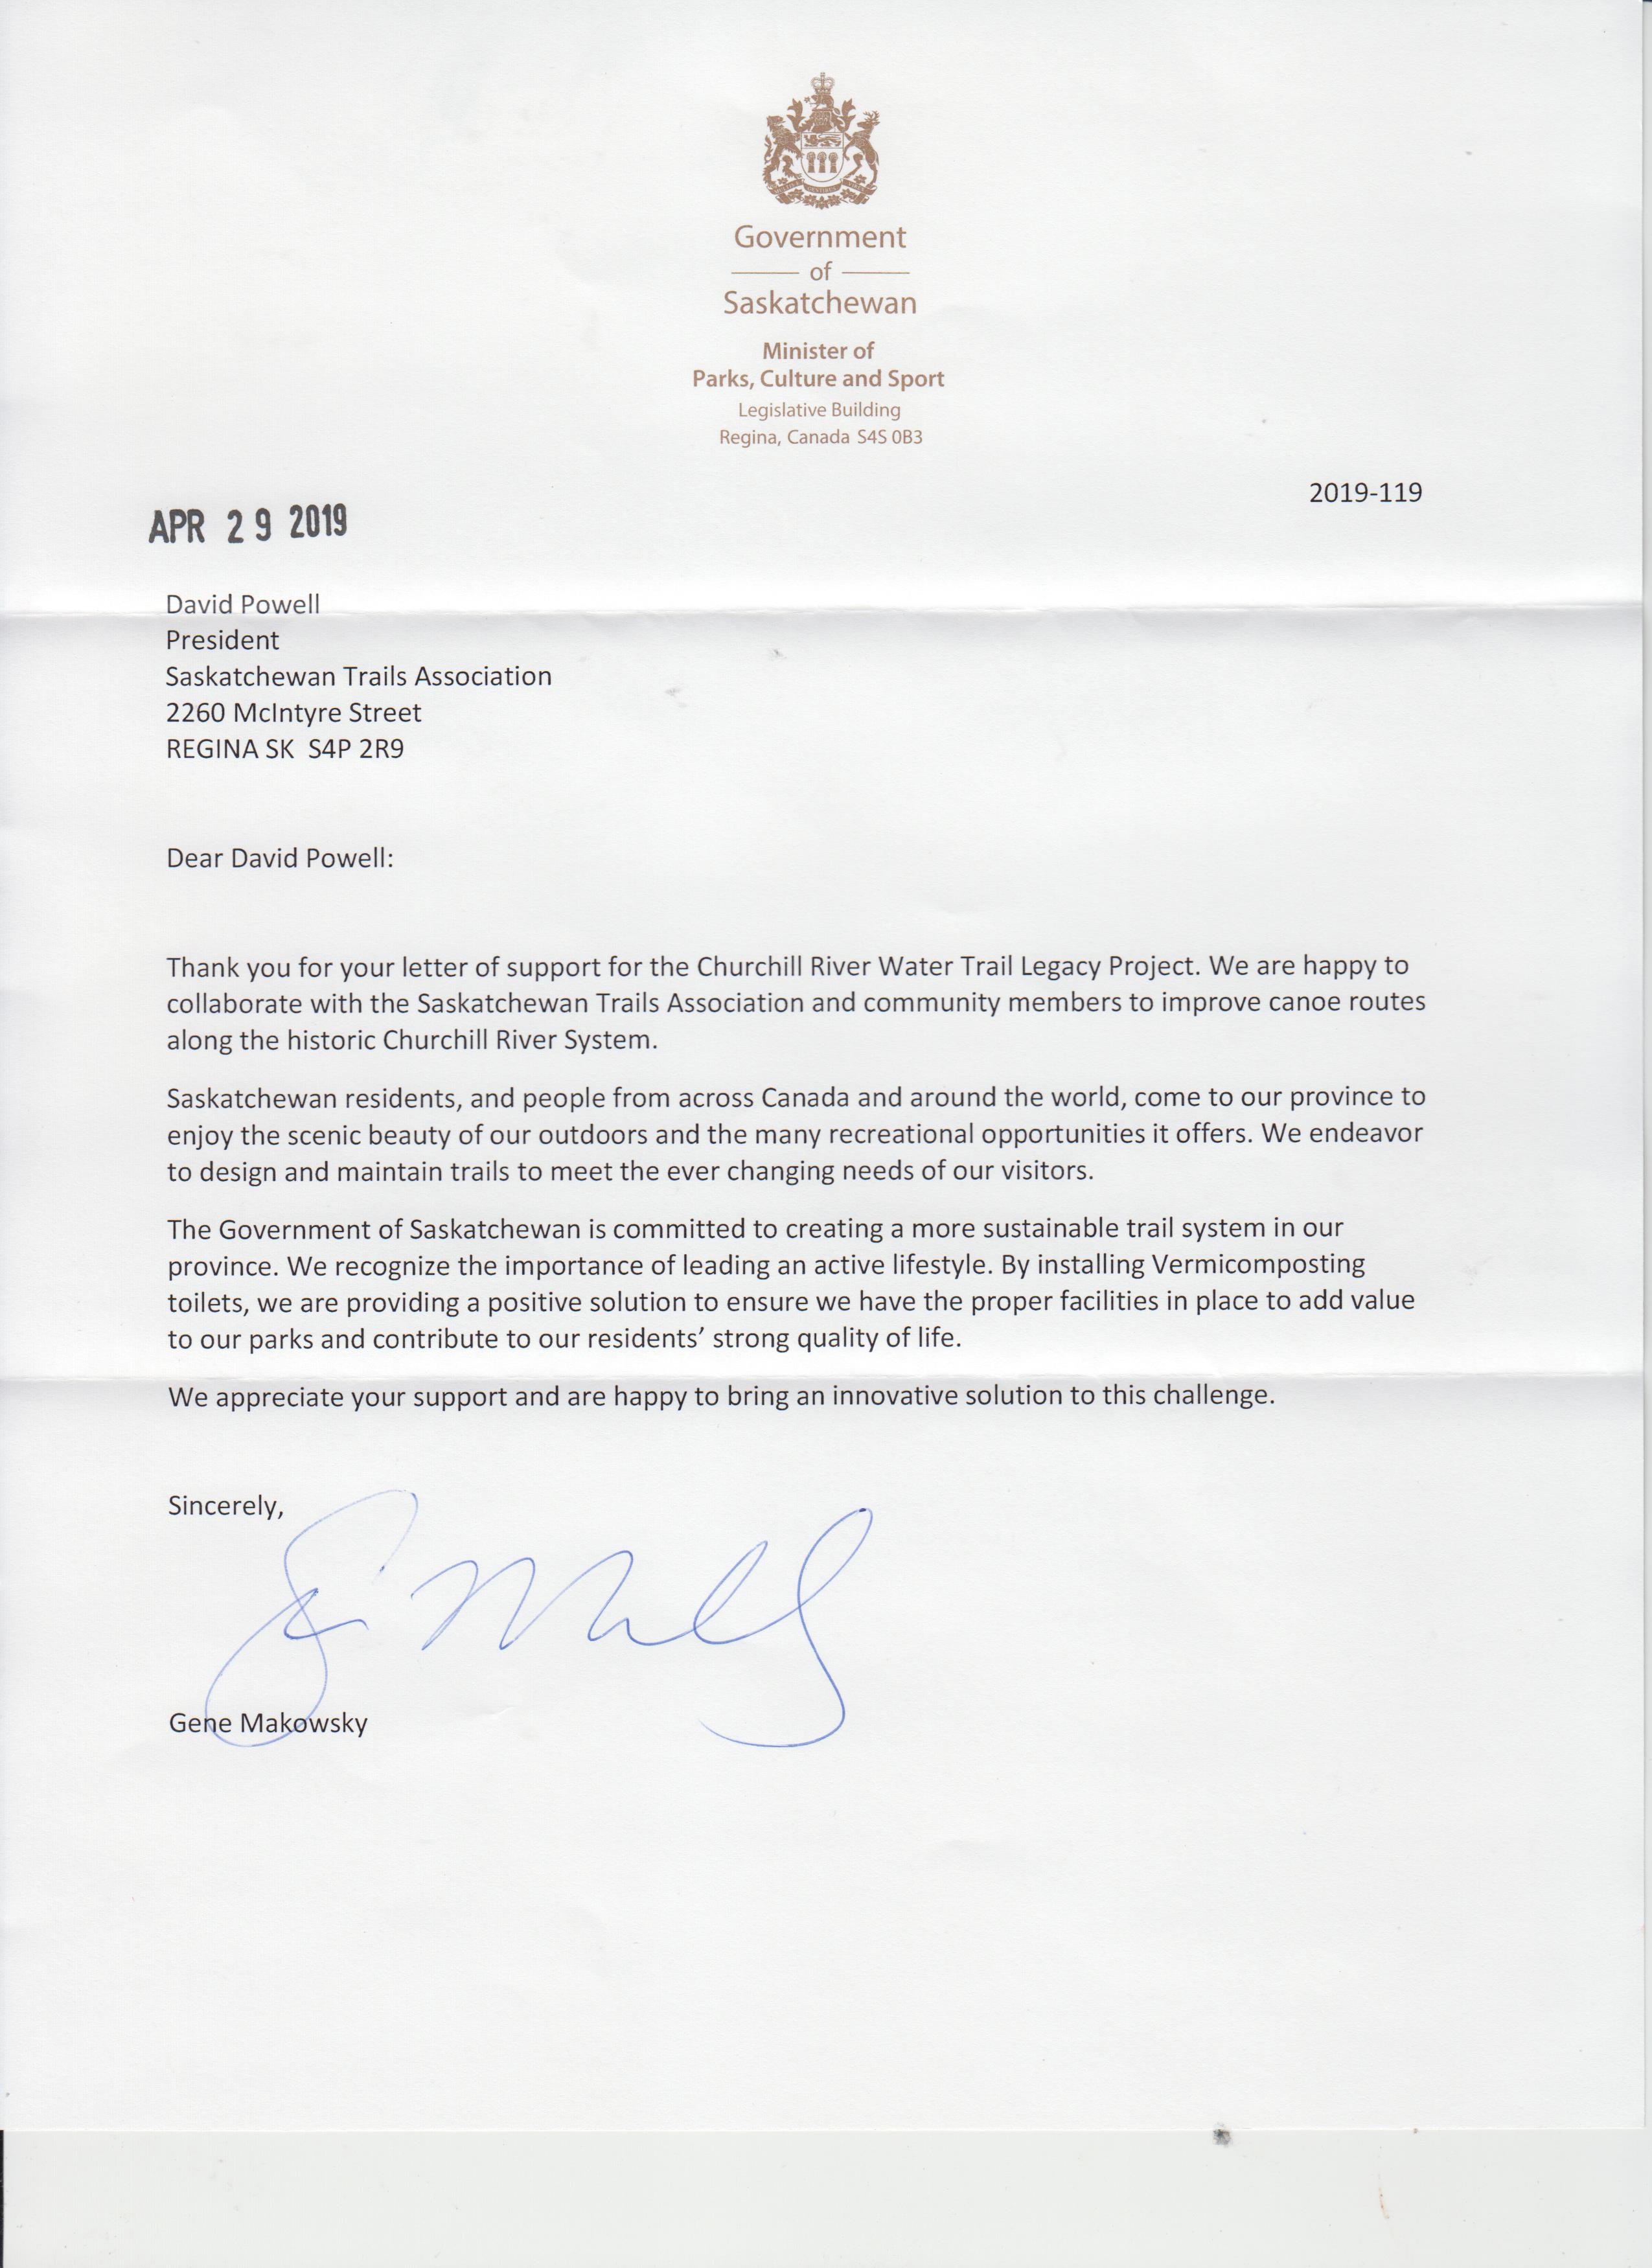 Response Letter - Churchill River Water Trail Legacy Project